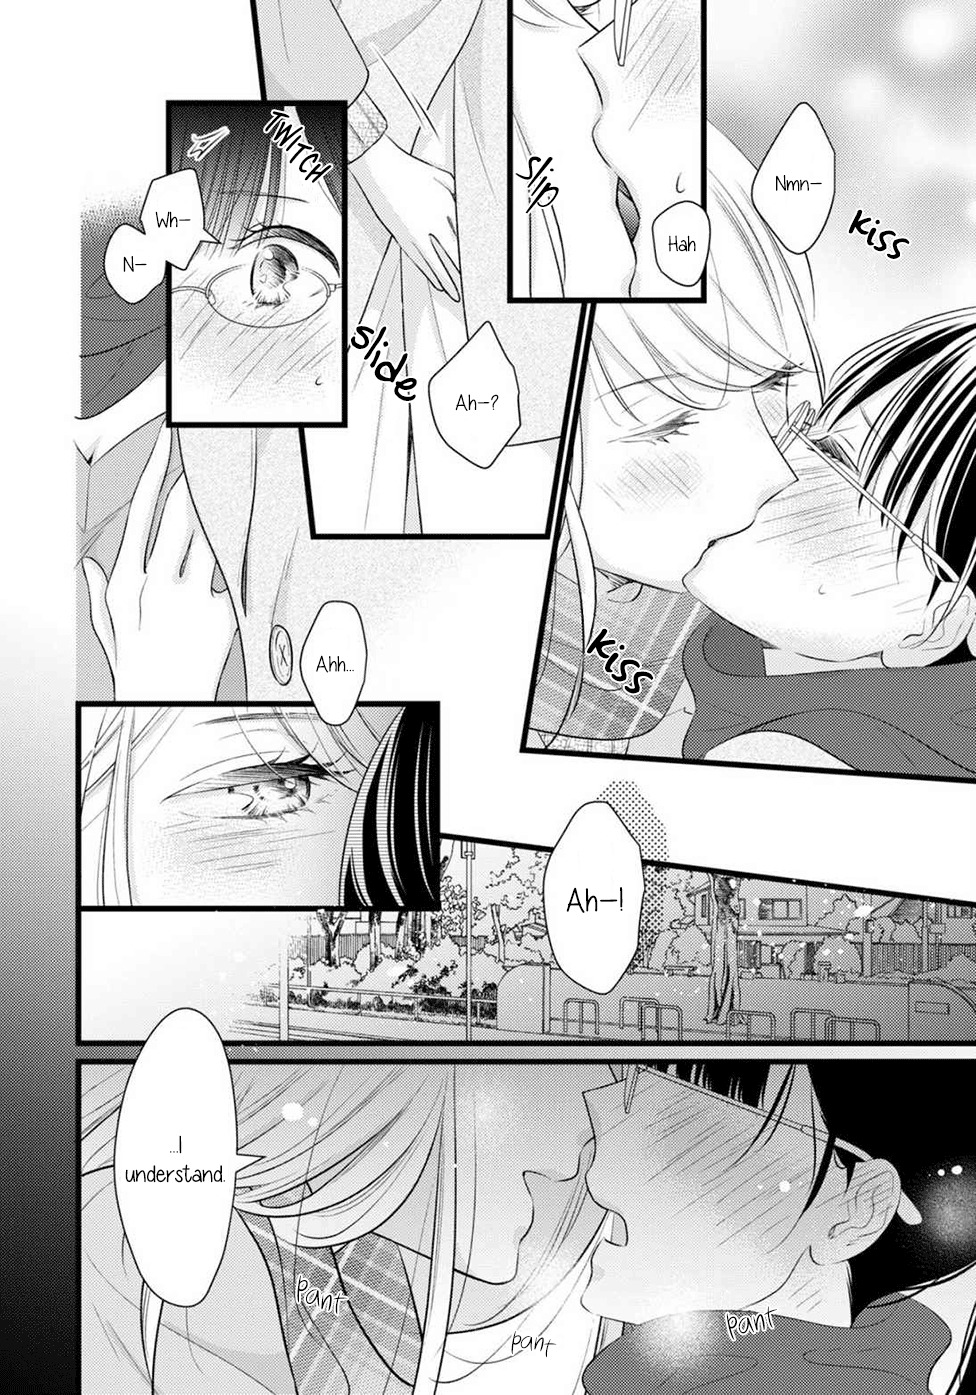 I Don't Know Why, but I Suddenly Wanted to Have Sex with My Coworker Who Sits Next to Me ch.1